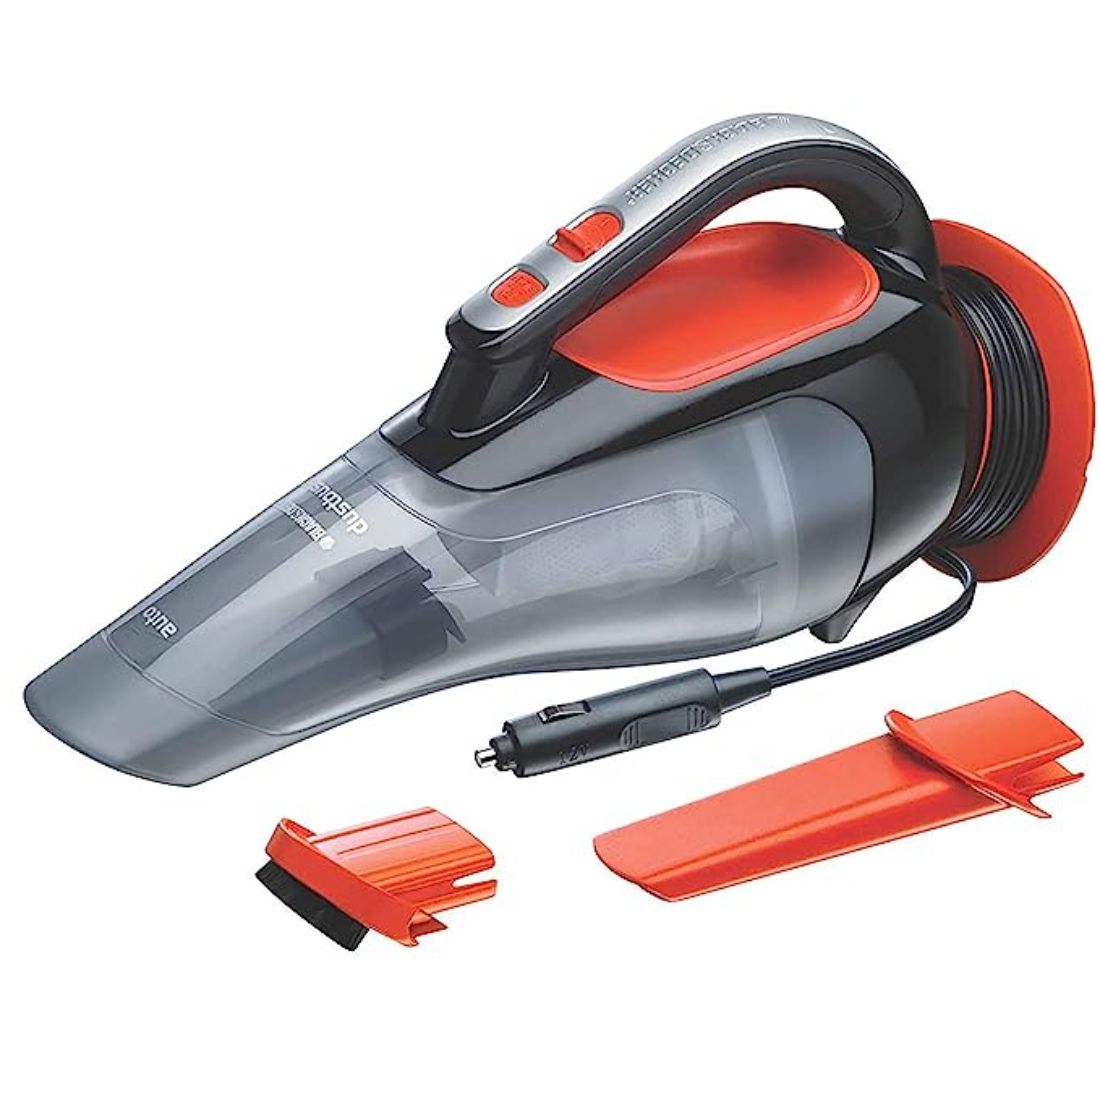 Black & Decker ADV1210 12V Powerful Dustbuster Automatic Car Vacuum Cleaner with 4 accessories